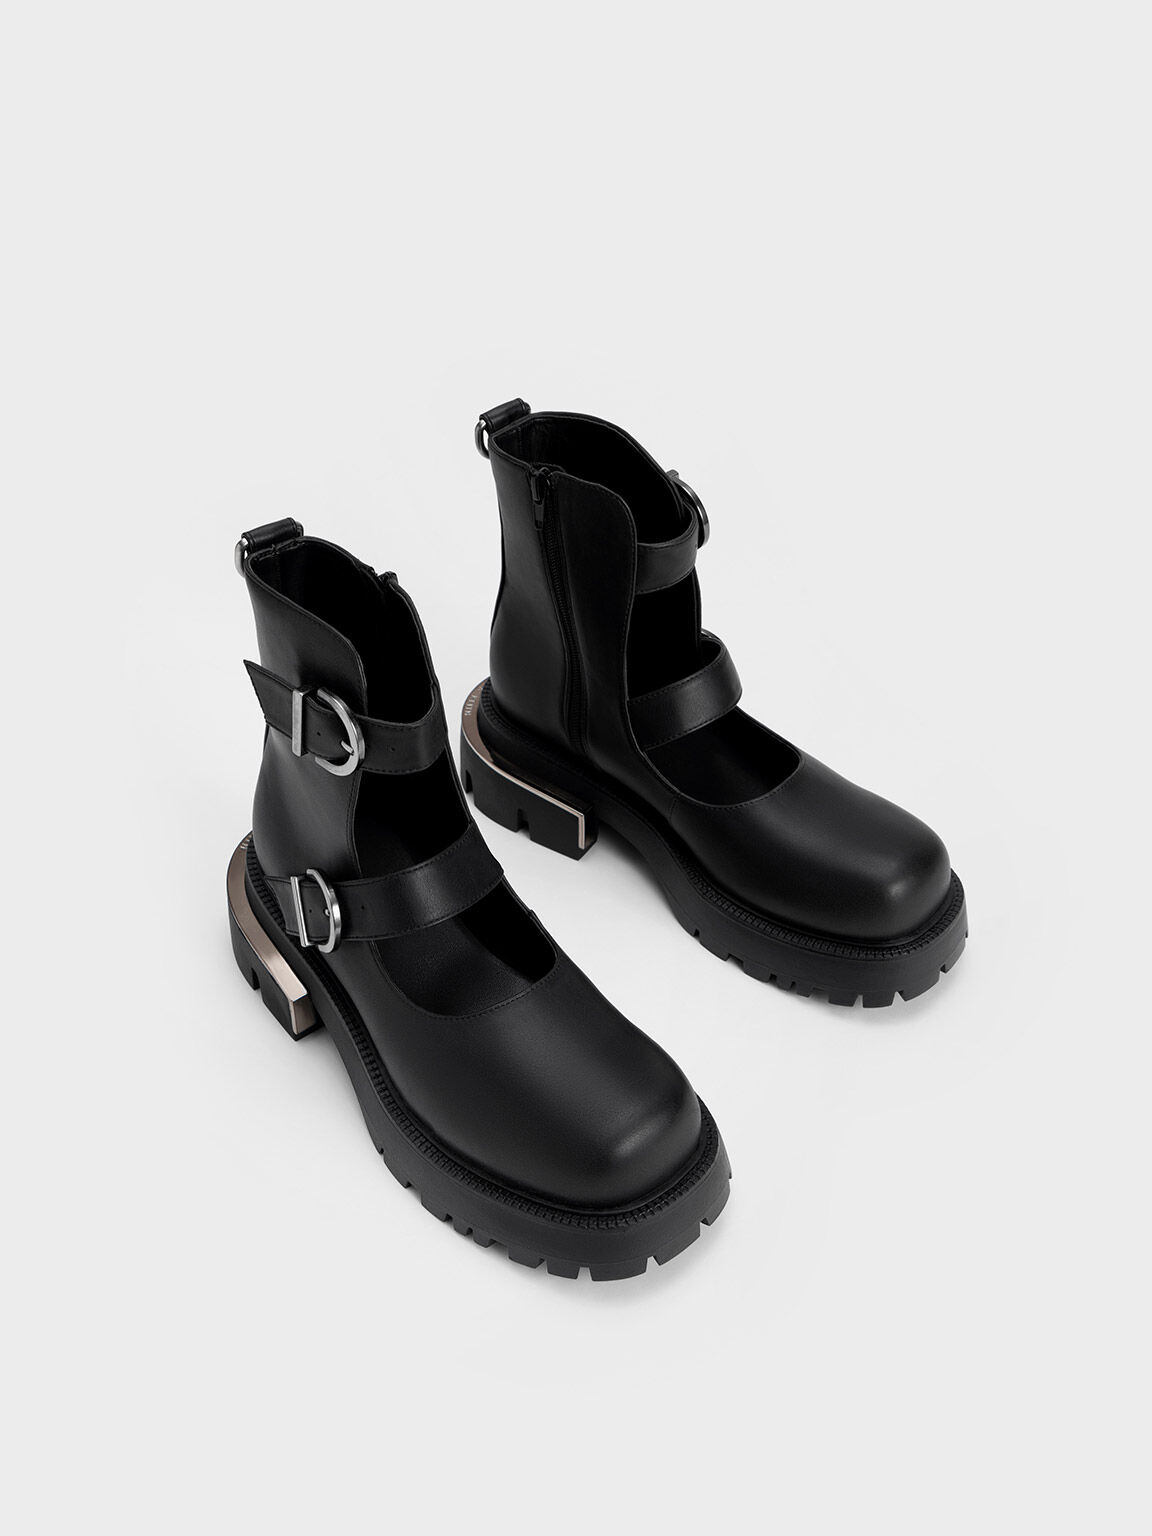 Selma Buckled Chunky Boots, Black, hi-res